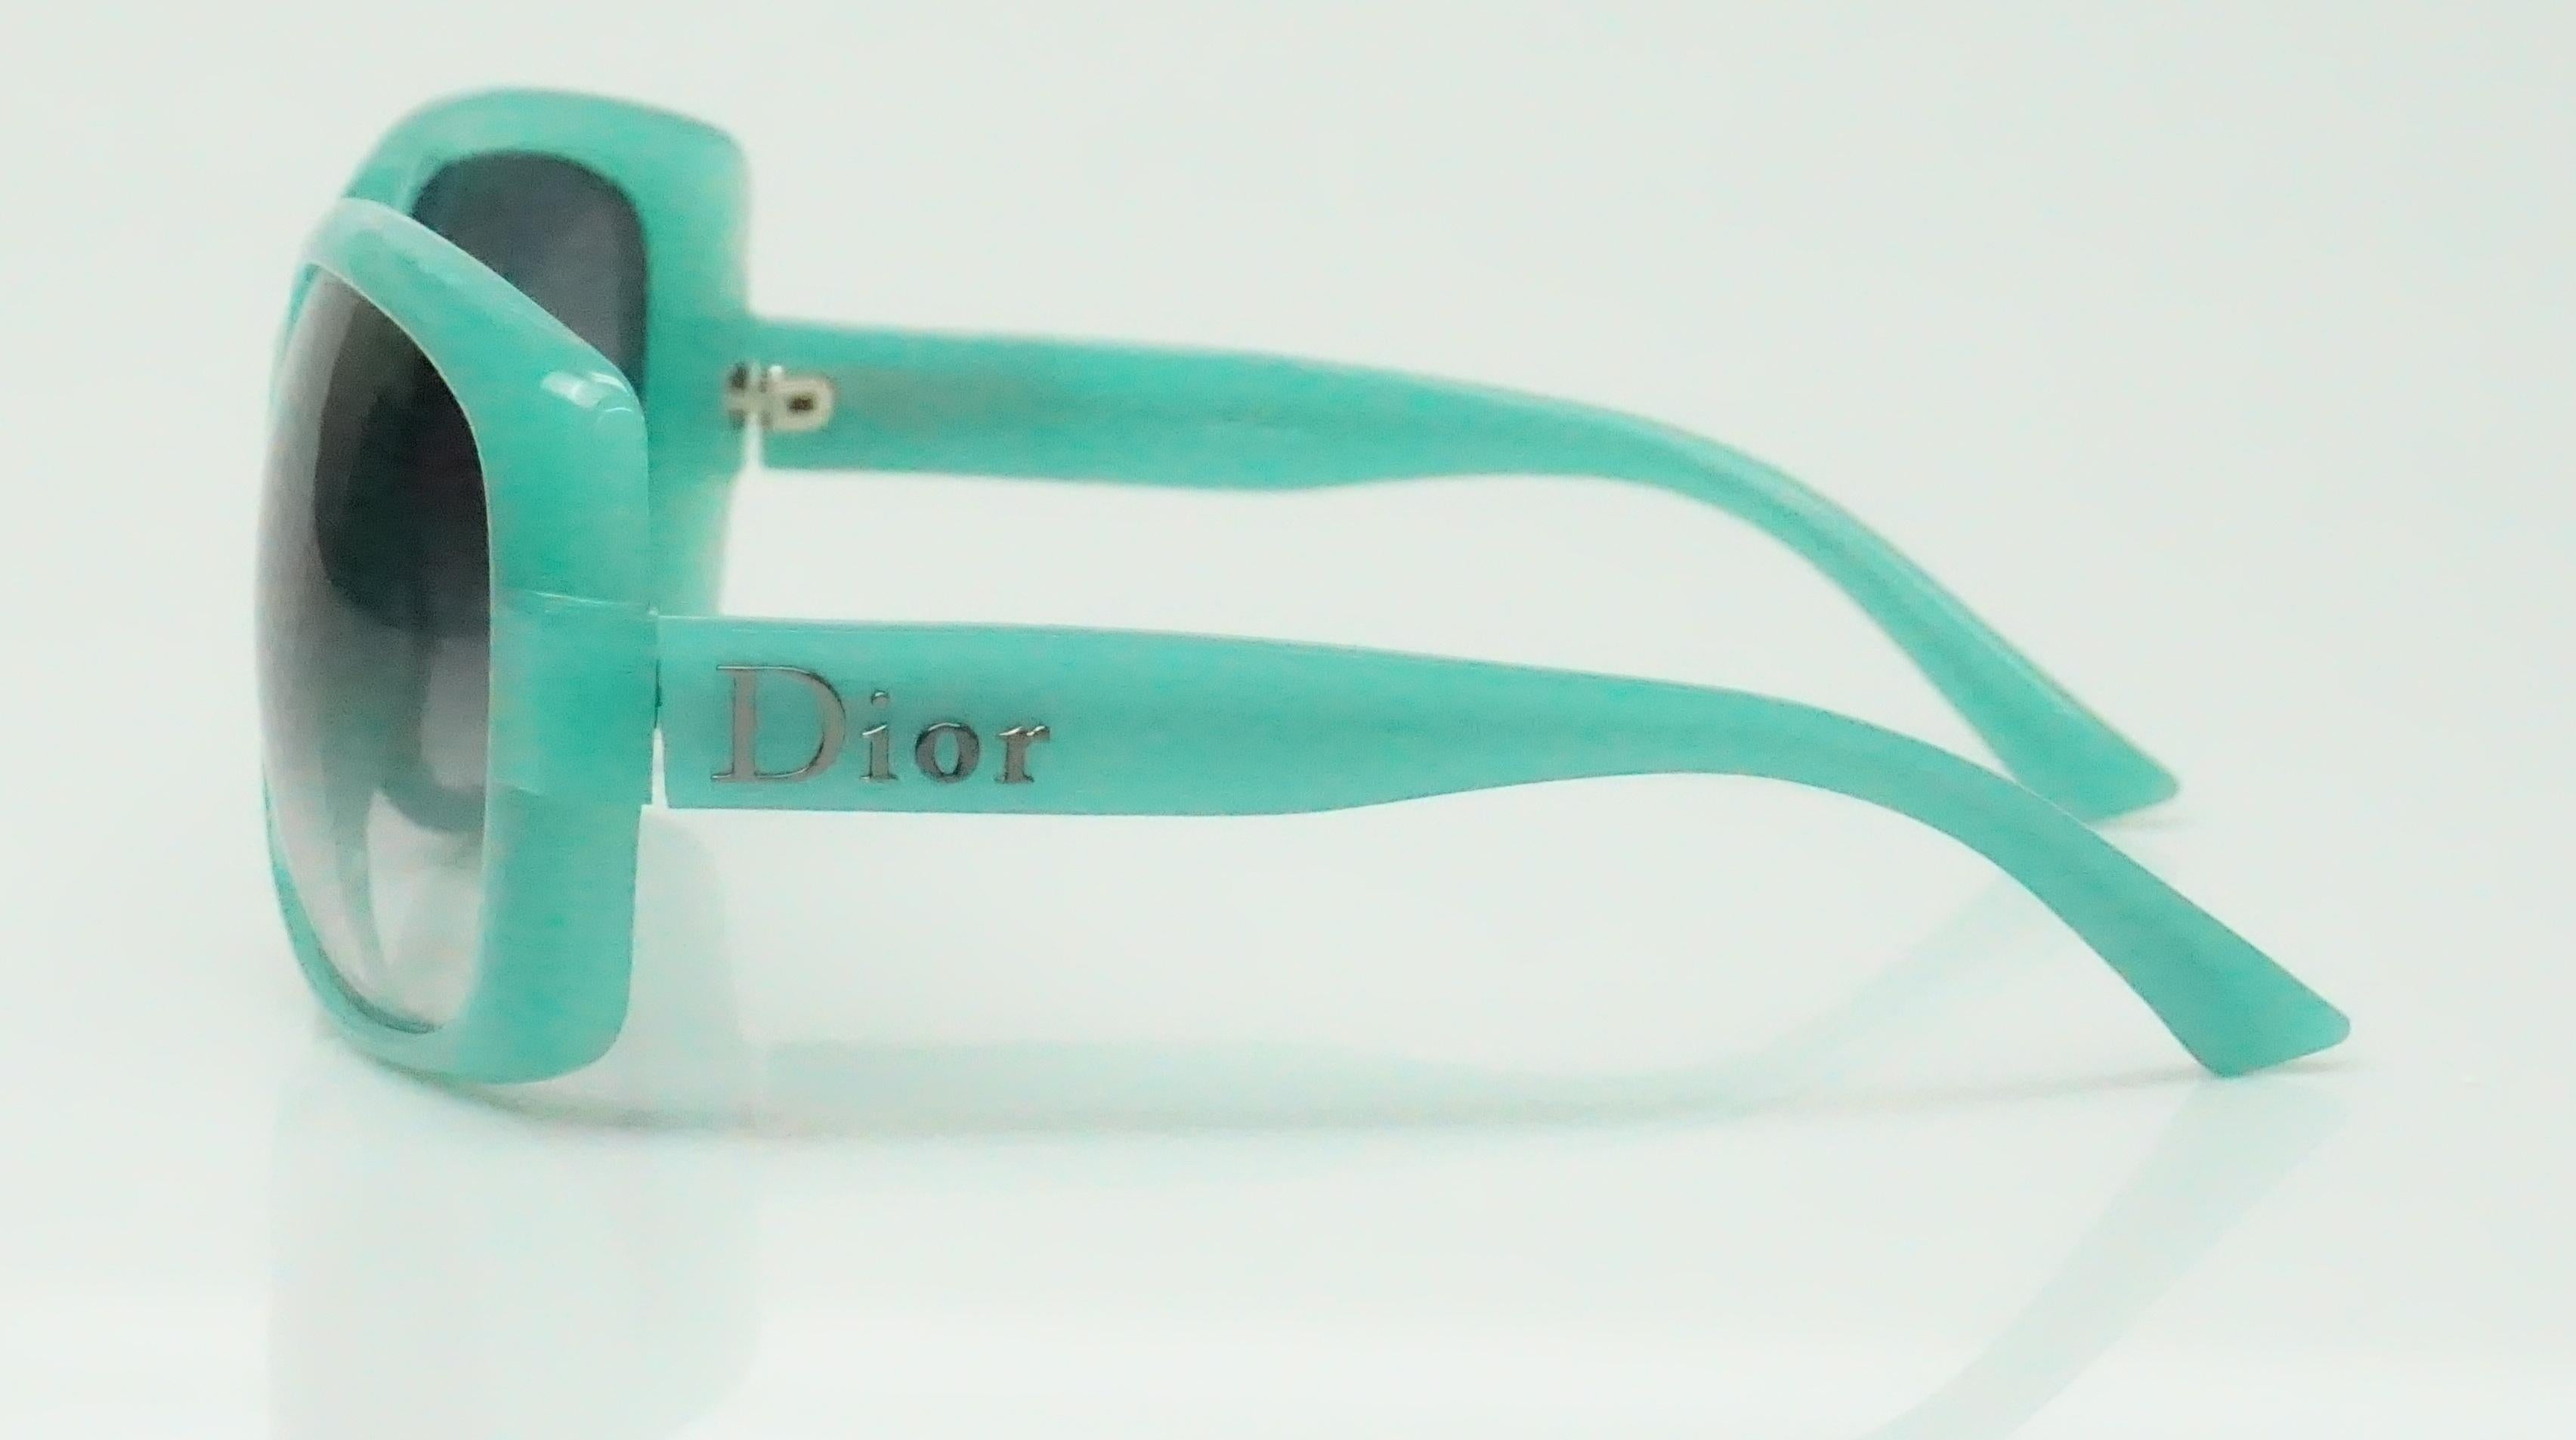 Christian Dior 60's Logo Turquoise Sunglasses- These fun sunglasses are in excellent condition. They are turquoise with opaque lens and silver Logo on legs.
Front: 6